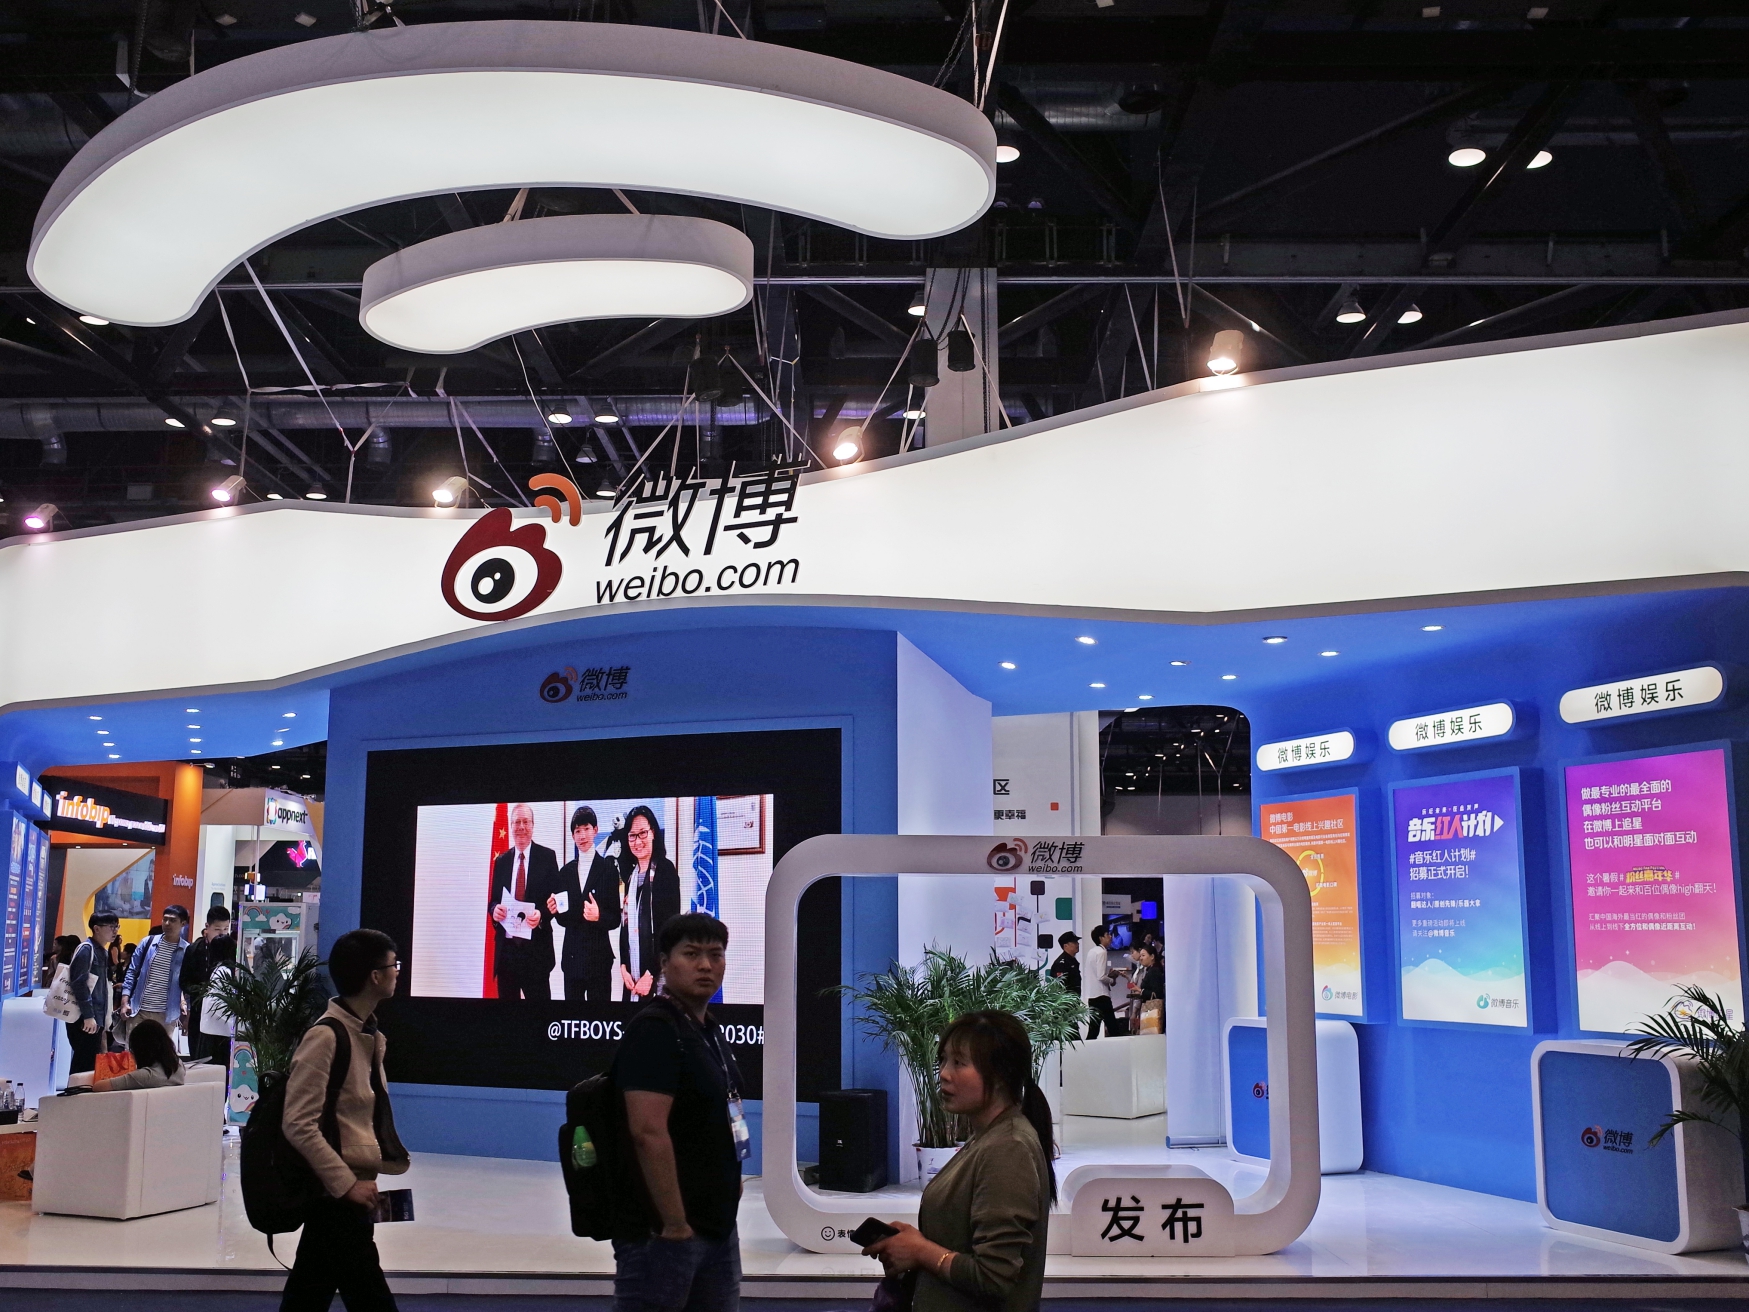 Chinese social media giant Weibo is raising $700M to fund acquisitions